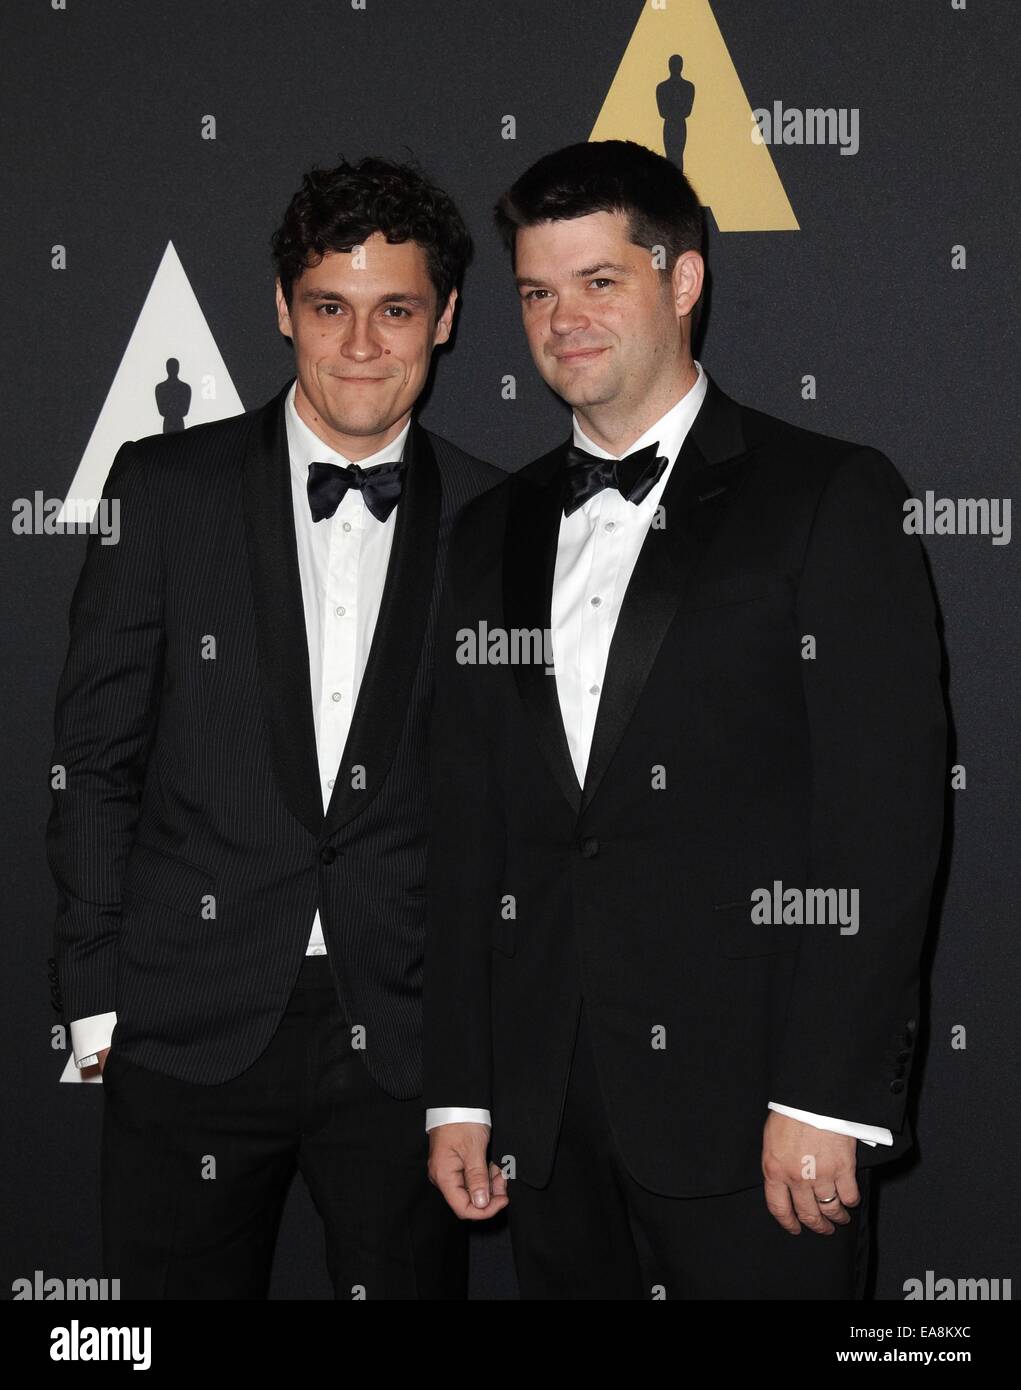 Los Angeles, CA, USA. 8th Nov, 2014. Bill Lord, Chris Miller at arrivals for The 2014 Governors Awards Hosted by AMPAS, Ray Dolby Ballroom at Hollywood and Highland Center, Los Angeles, CA November 8, 2014. Credit:  David Longendyke/Everett Collection/Alamy Live News Stock Photo